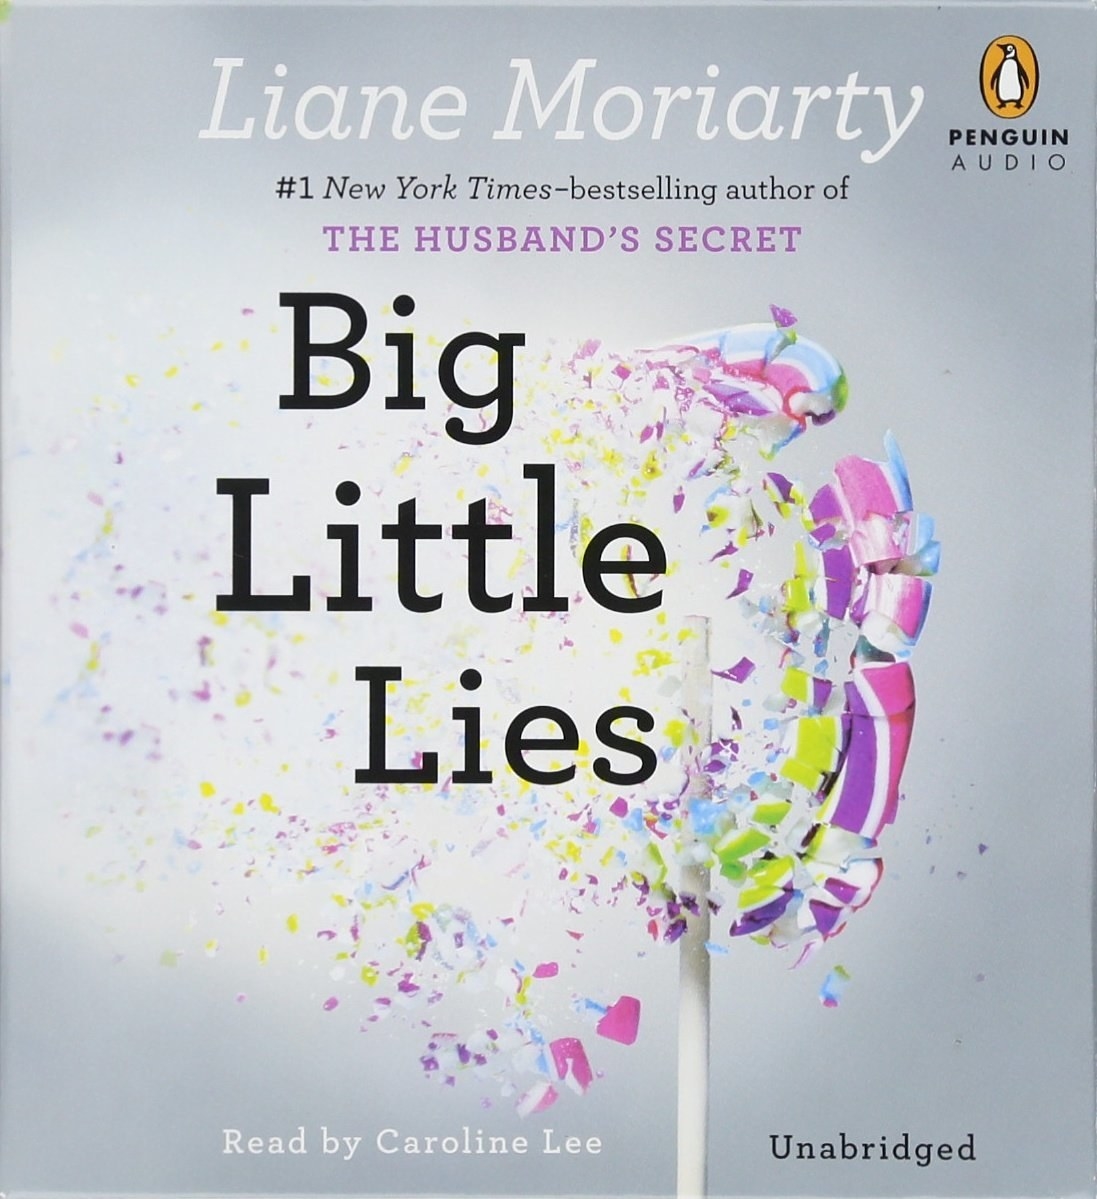 The cover of &quot;Big Little Lies&quot; by Liane Moriarty.